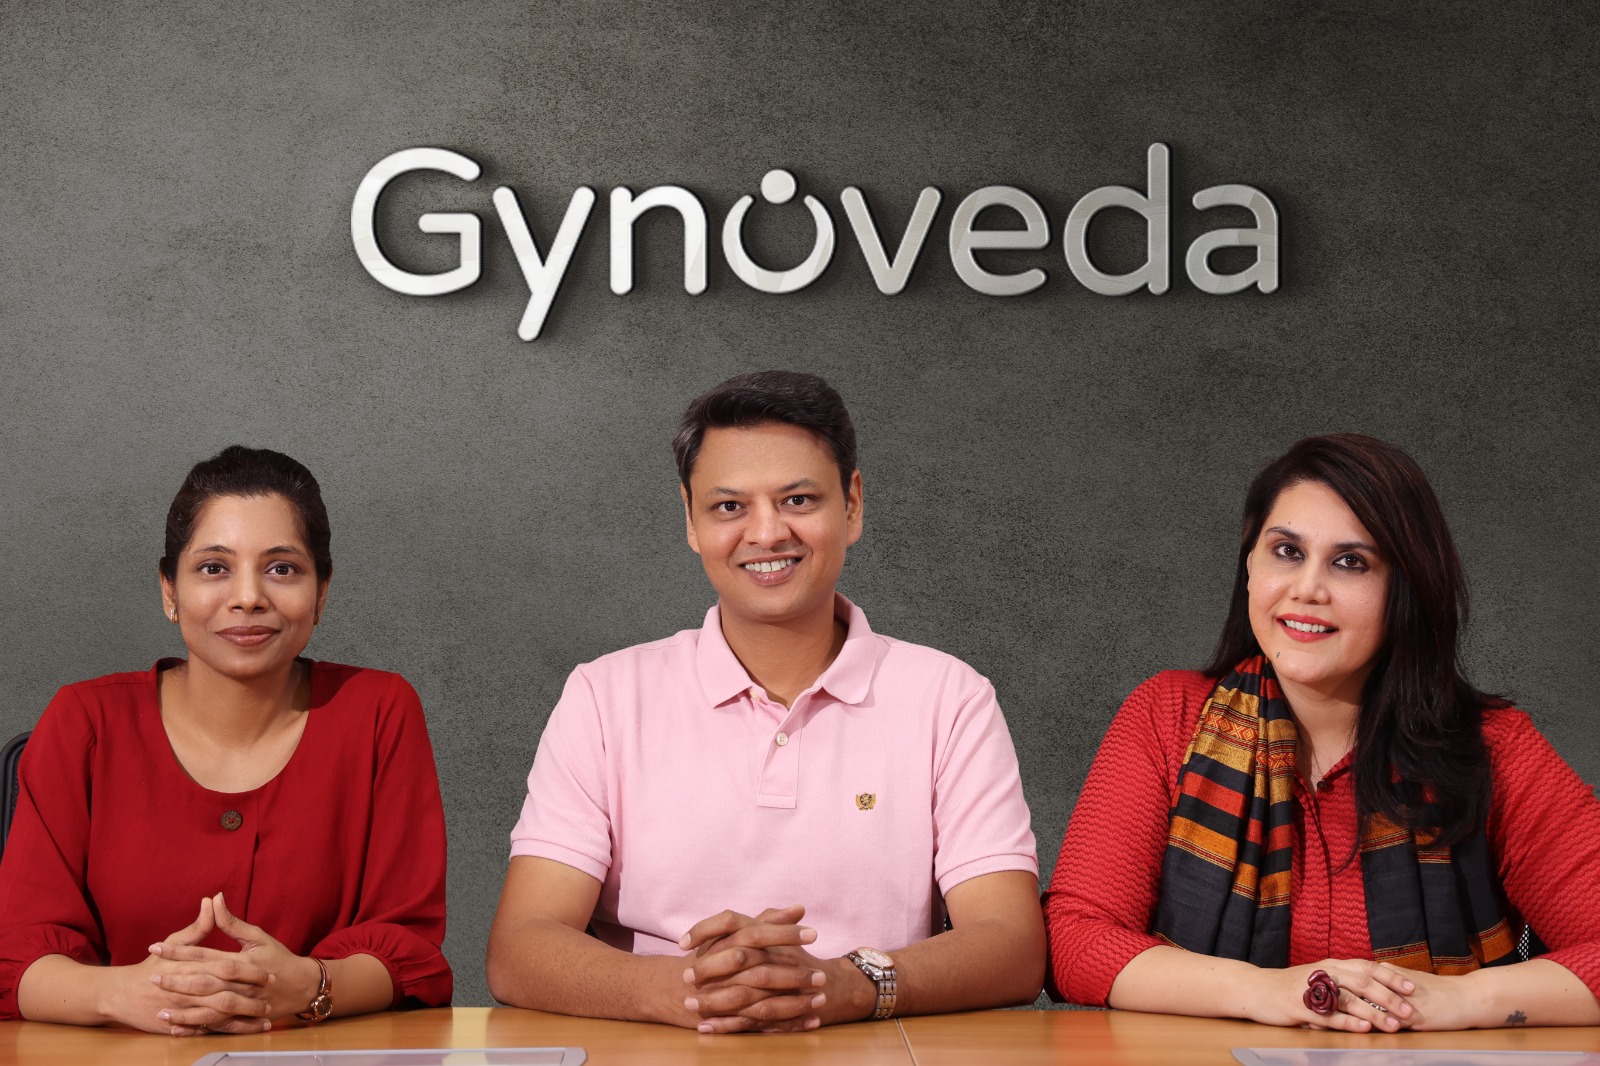 Ayurveda-backed Women's Healthcare Startup Gynoveda Raises $10 Mn in Series A Funding Led by India Alternatives Fund